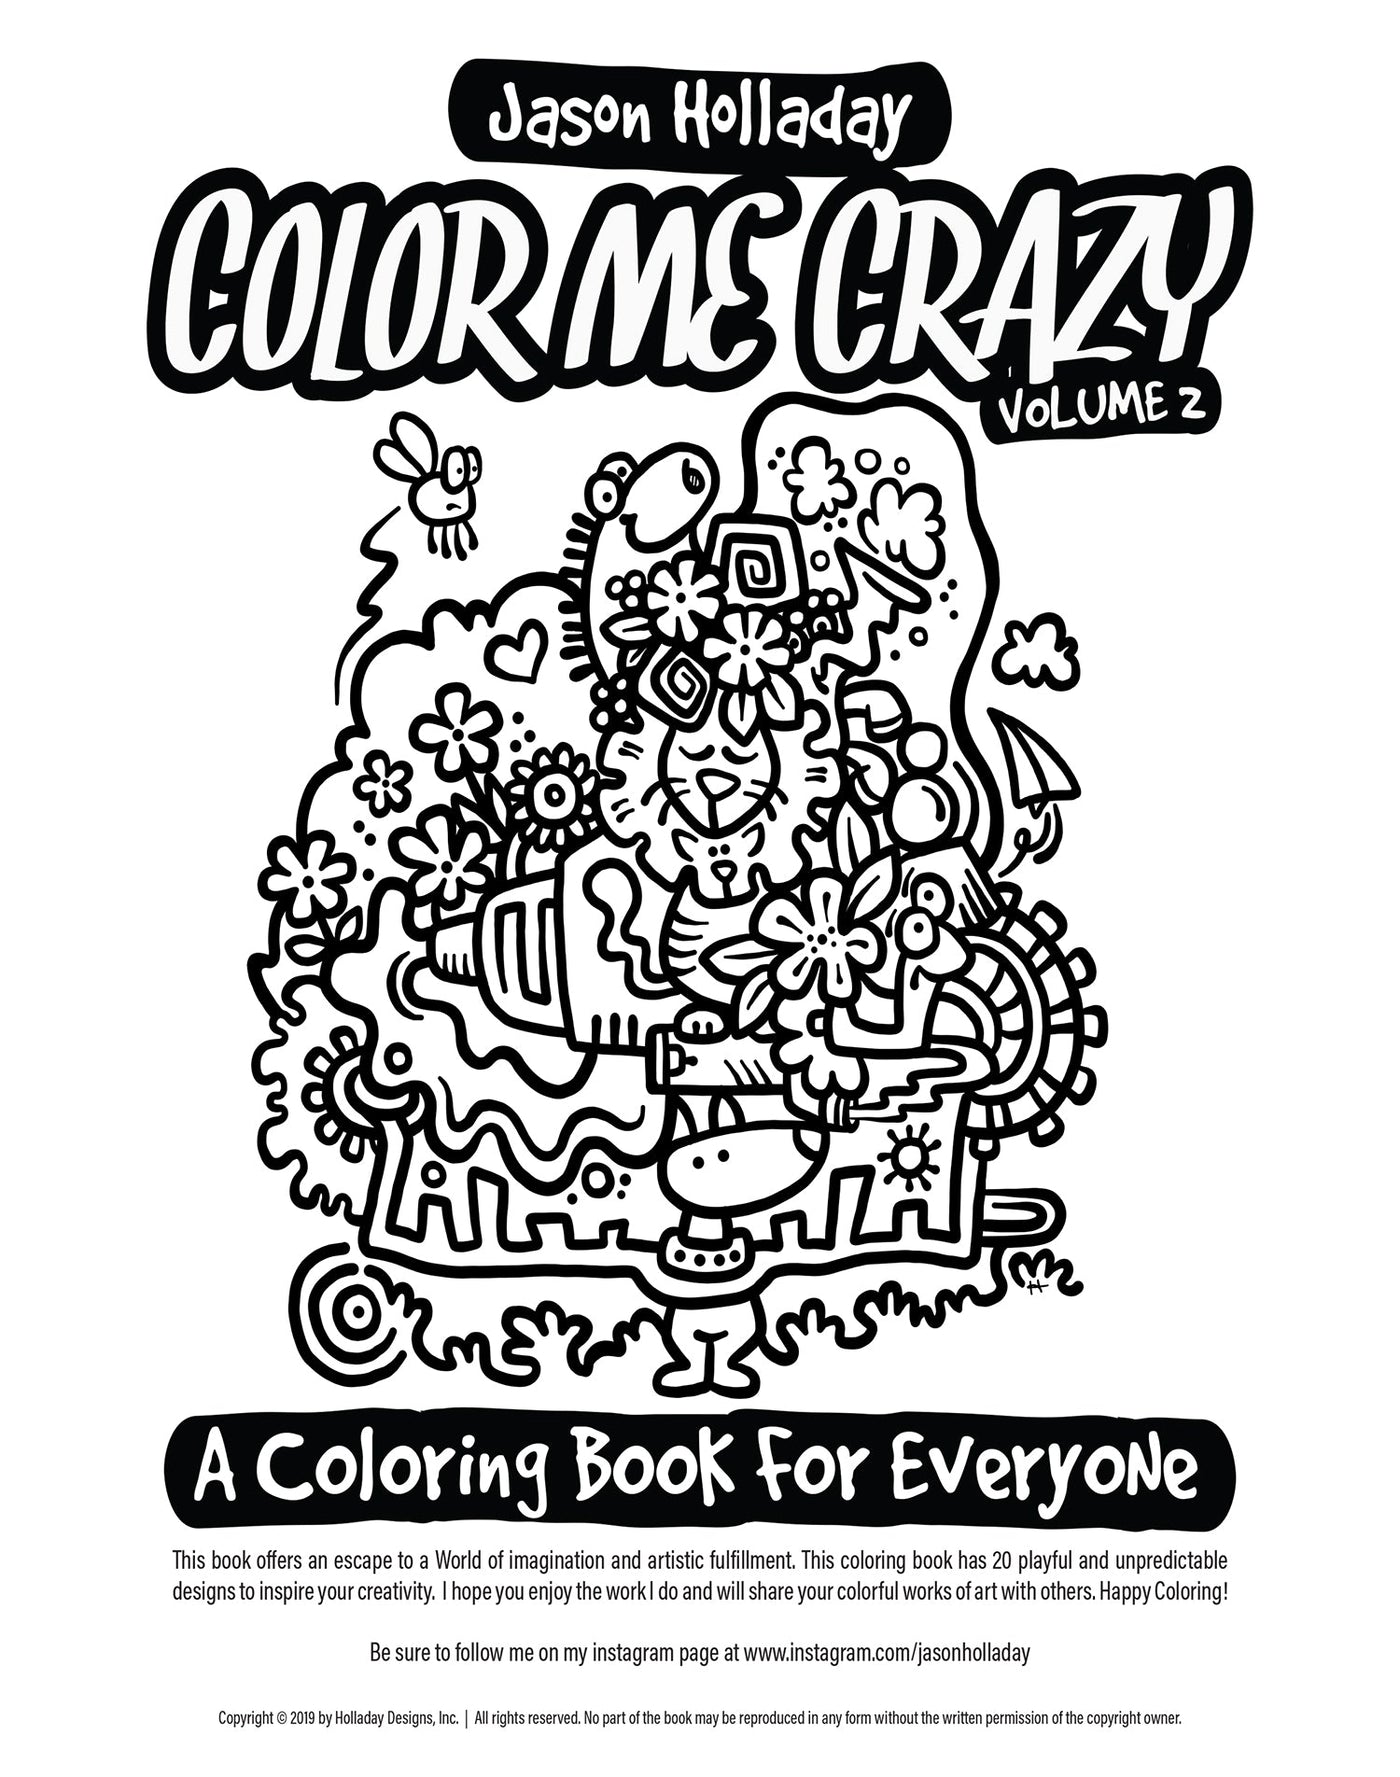 2 Creativity Hacks You Can Learn From the Adult Coloring Book Craze (Even  If Coloring Isn't Your Thing)